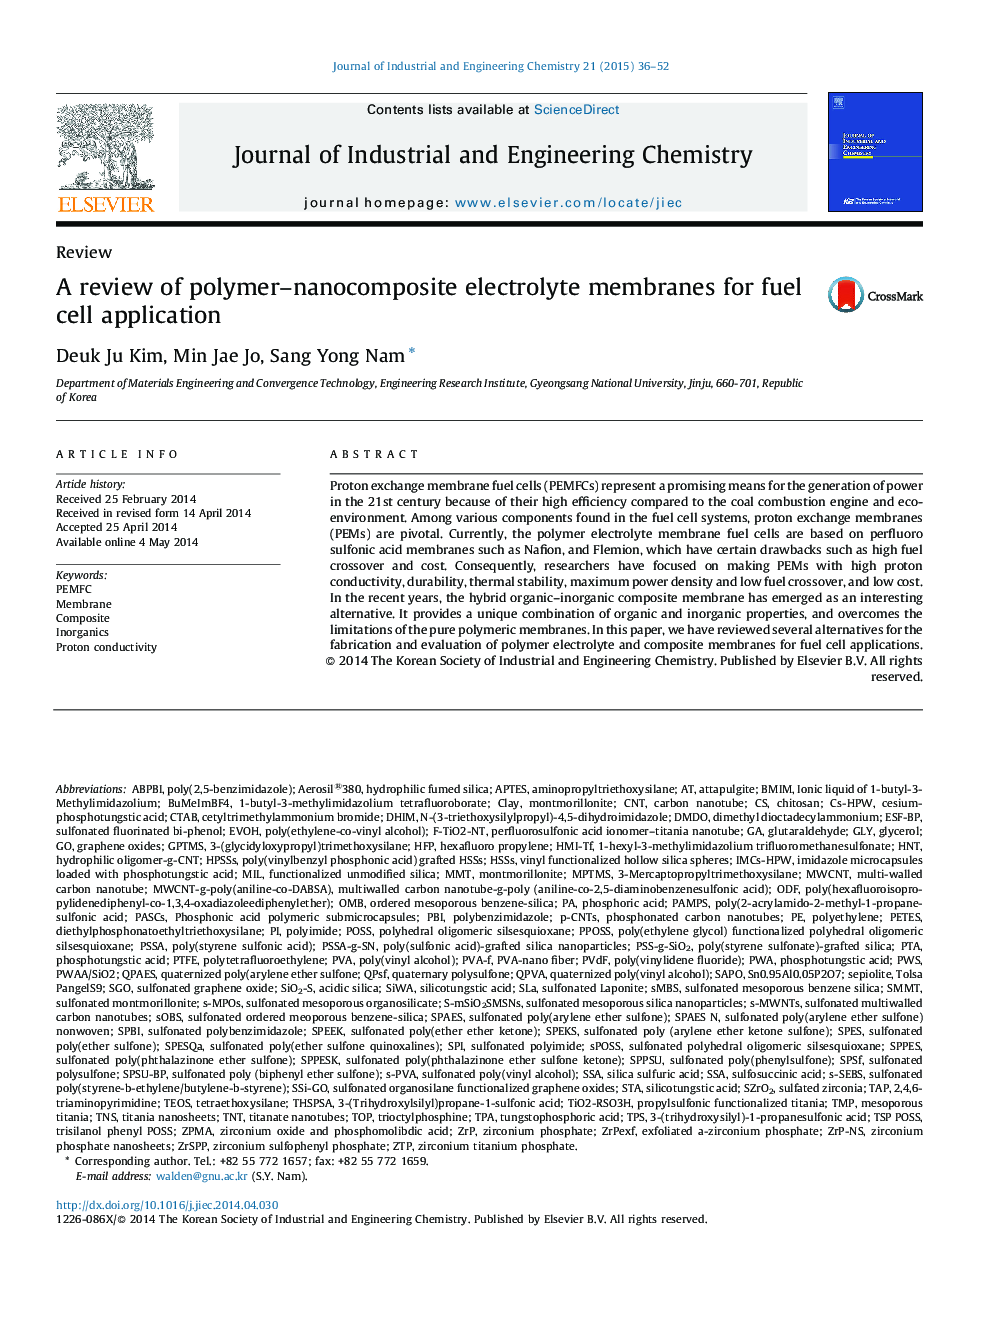 A review of polymer–nanocomposite electrolyte membranes for fuel cell application